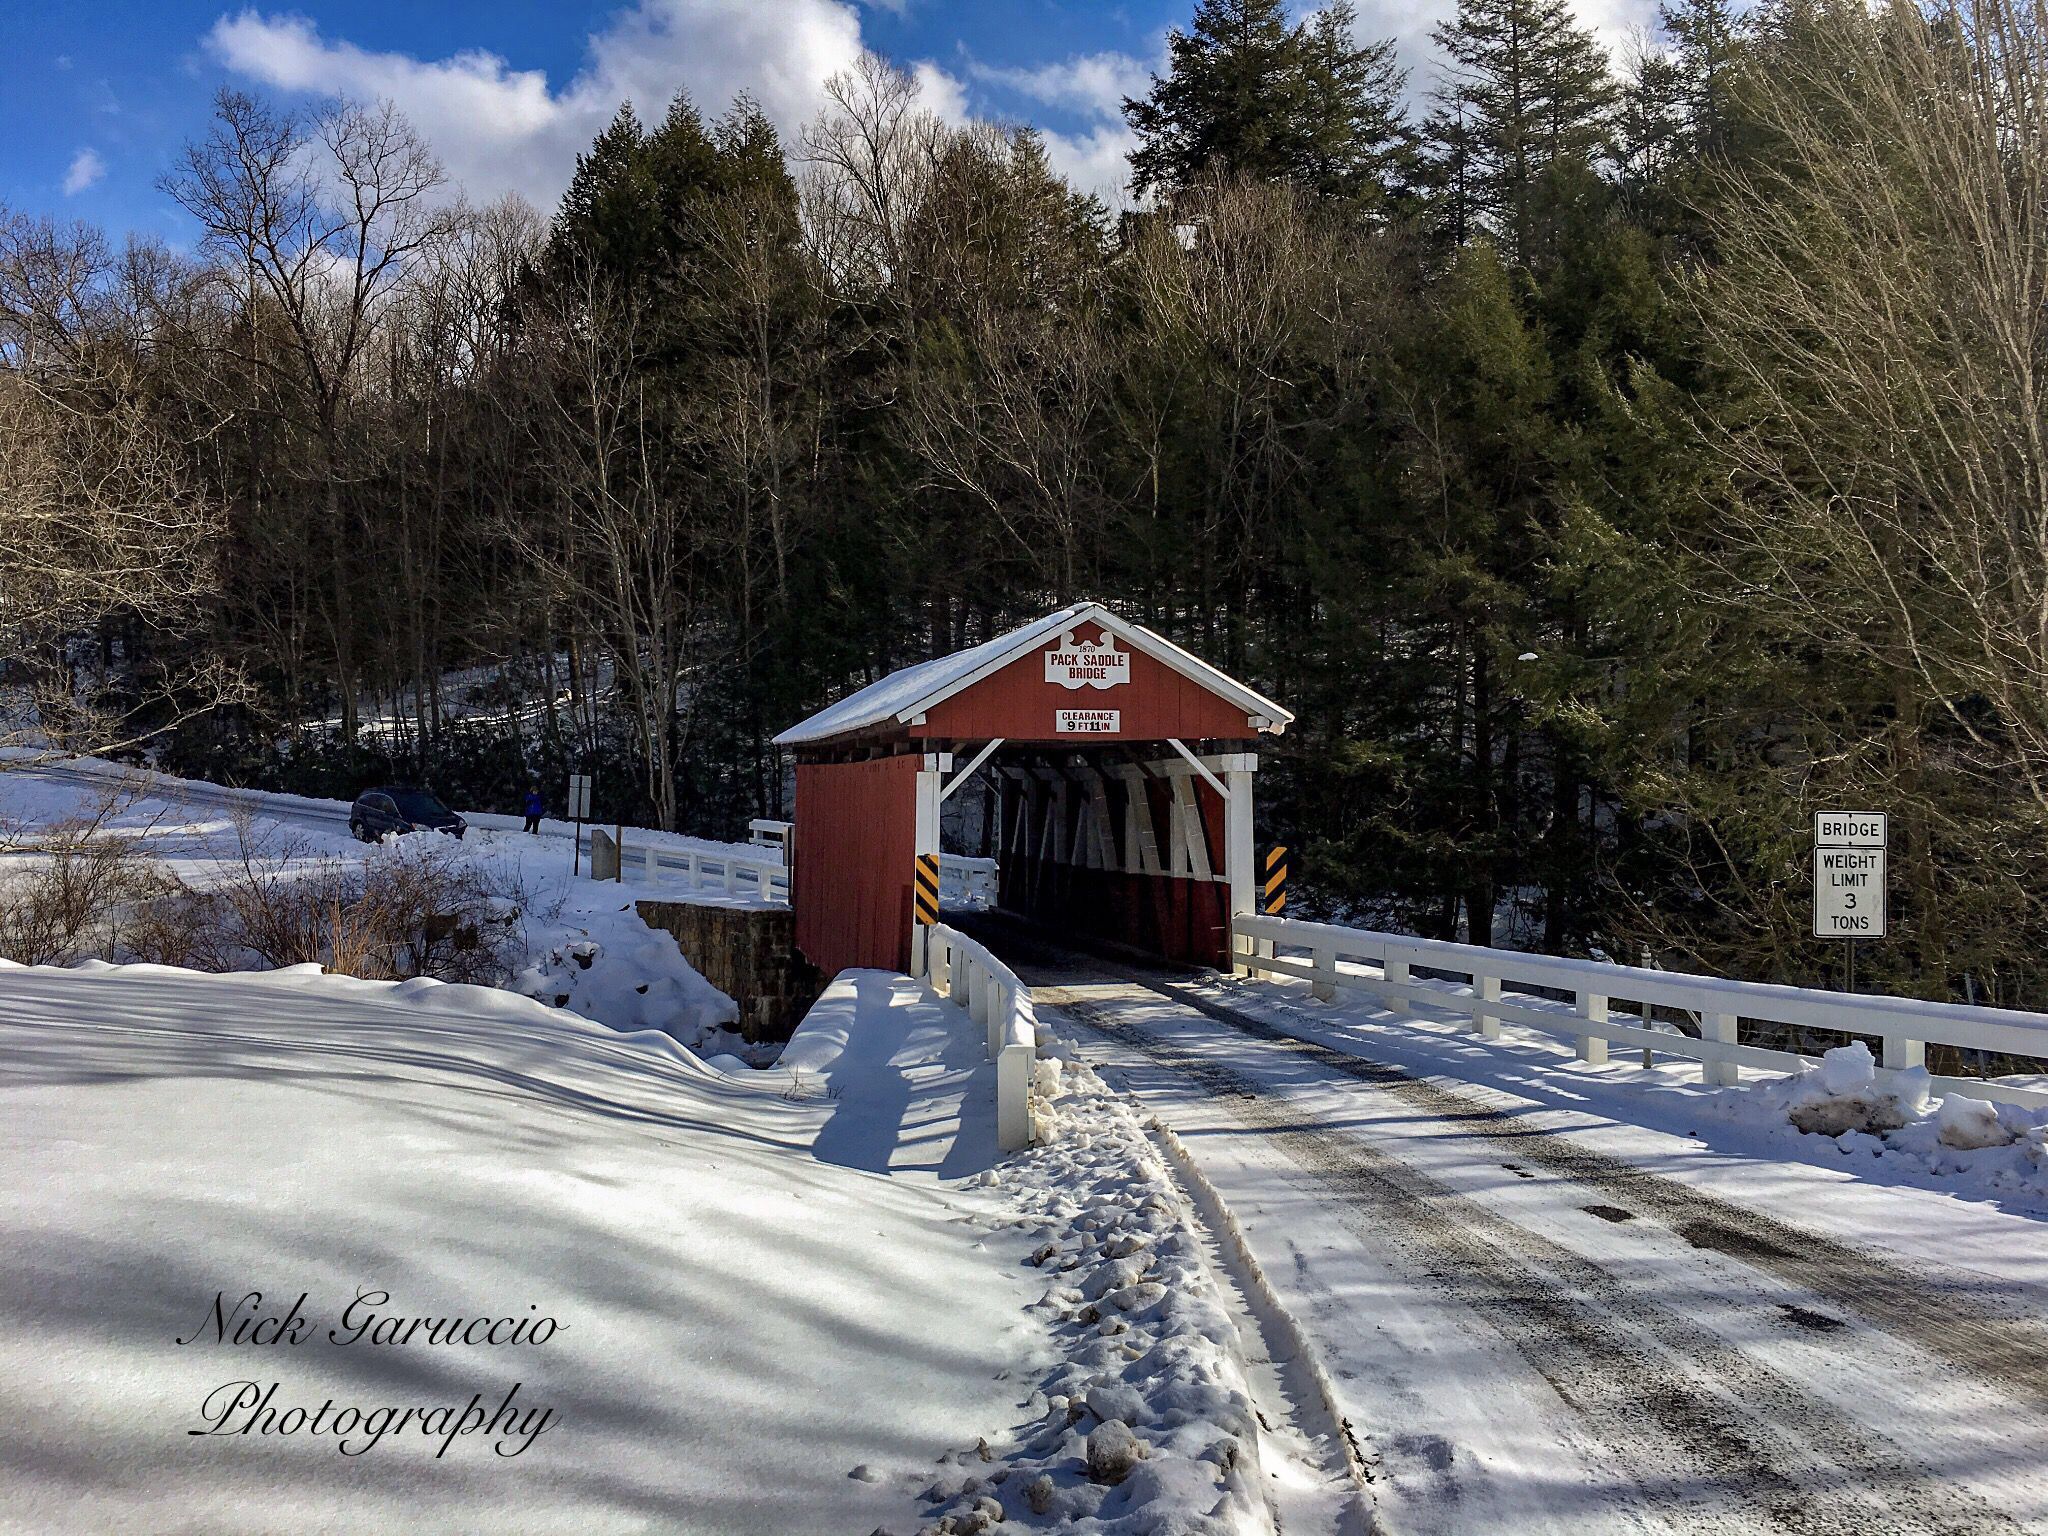 Snow Capped Covered Bridges in Winter of South Western Pennsylvania